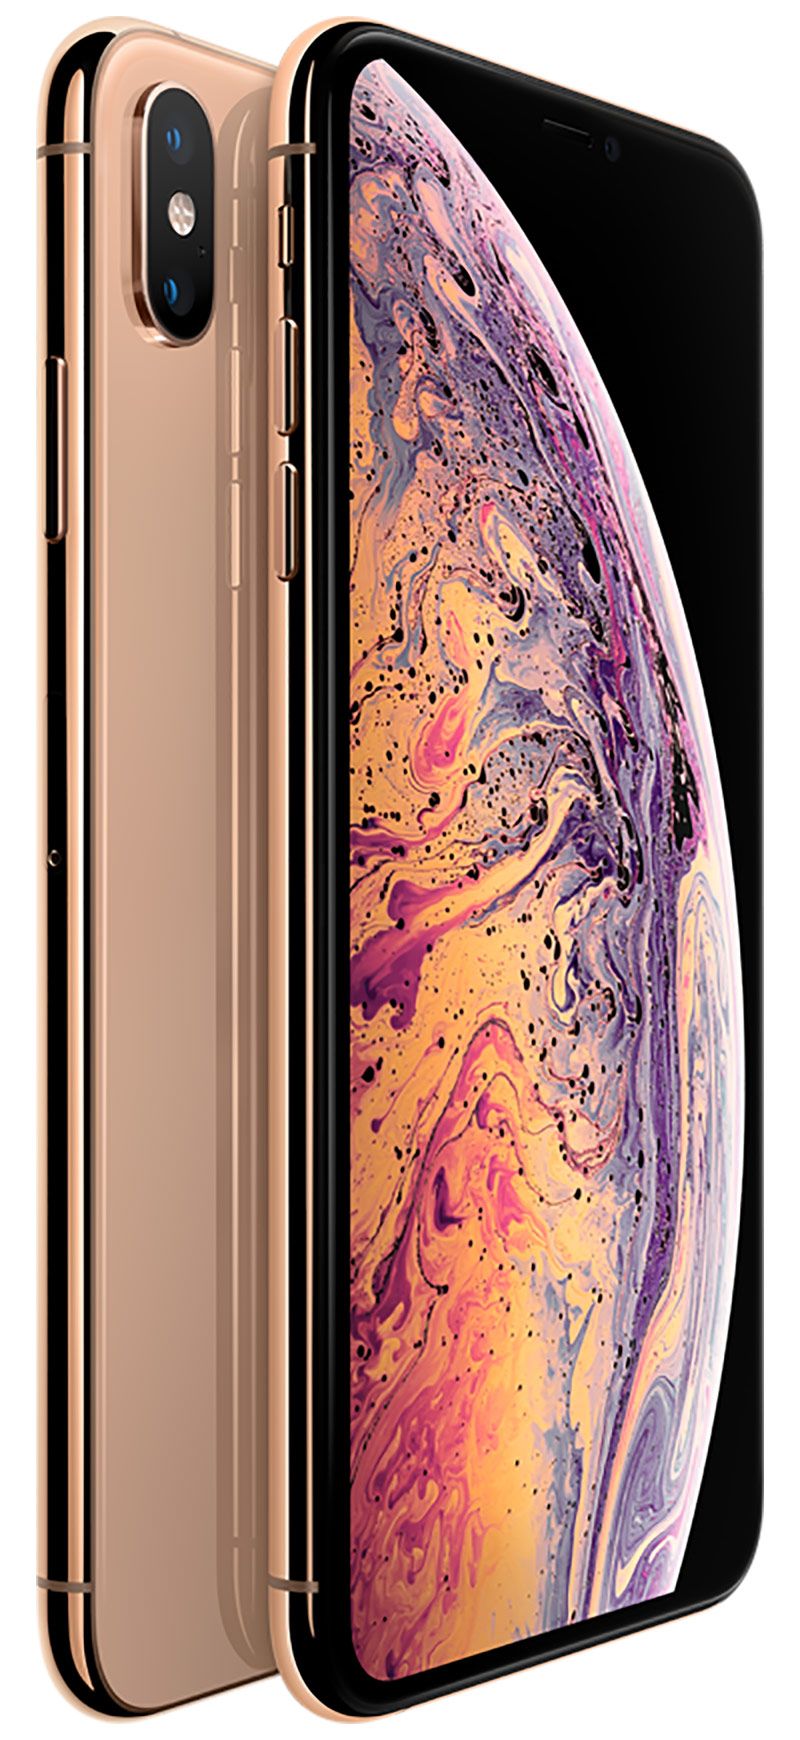 Apple iPhone Xs Max or 512Go